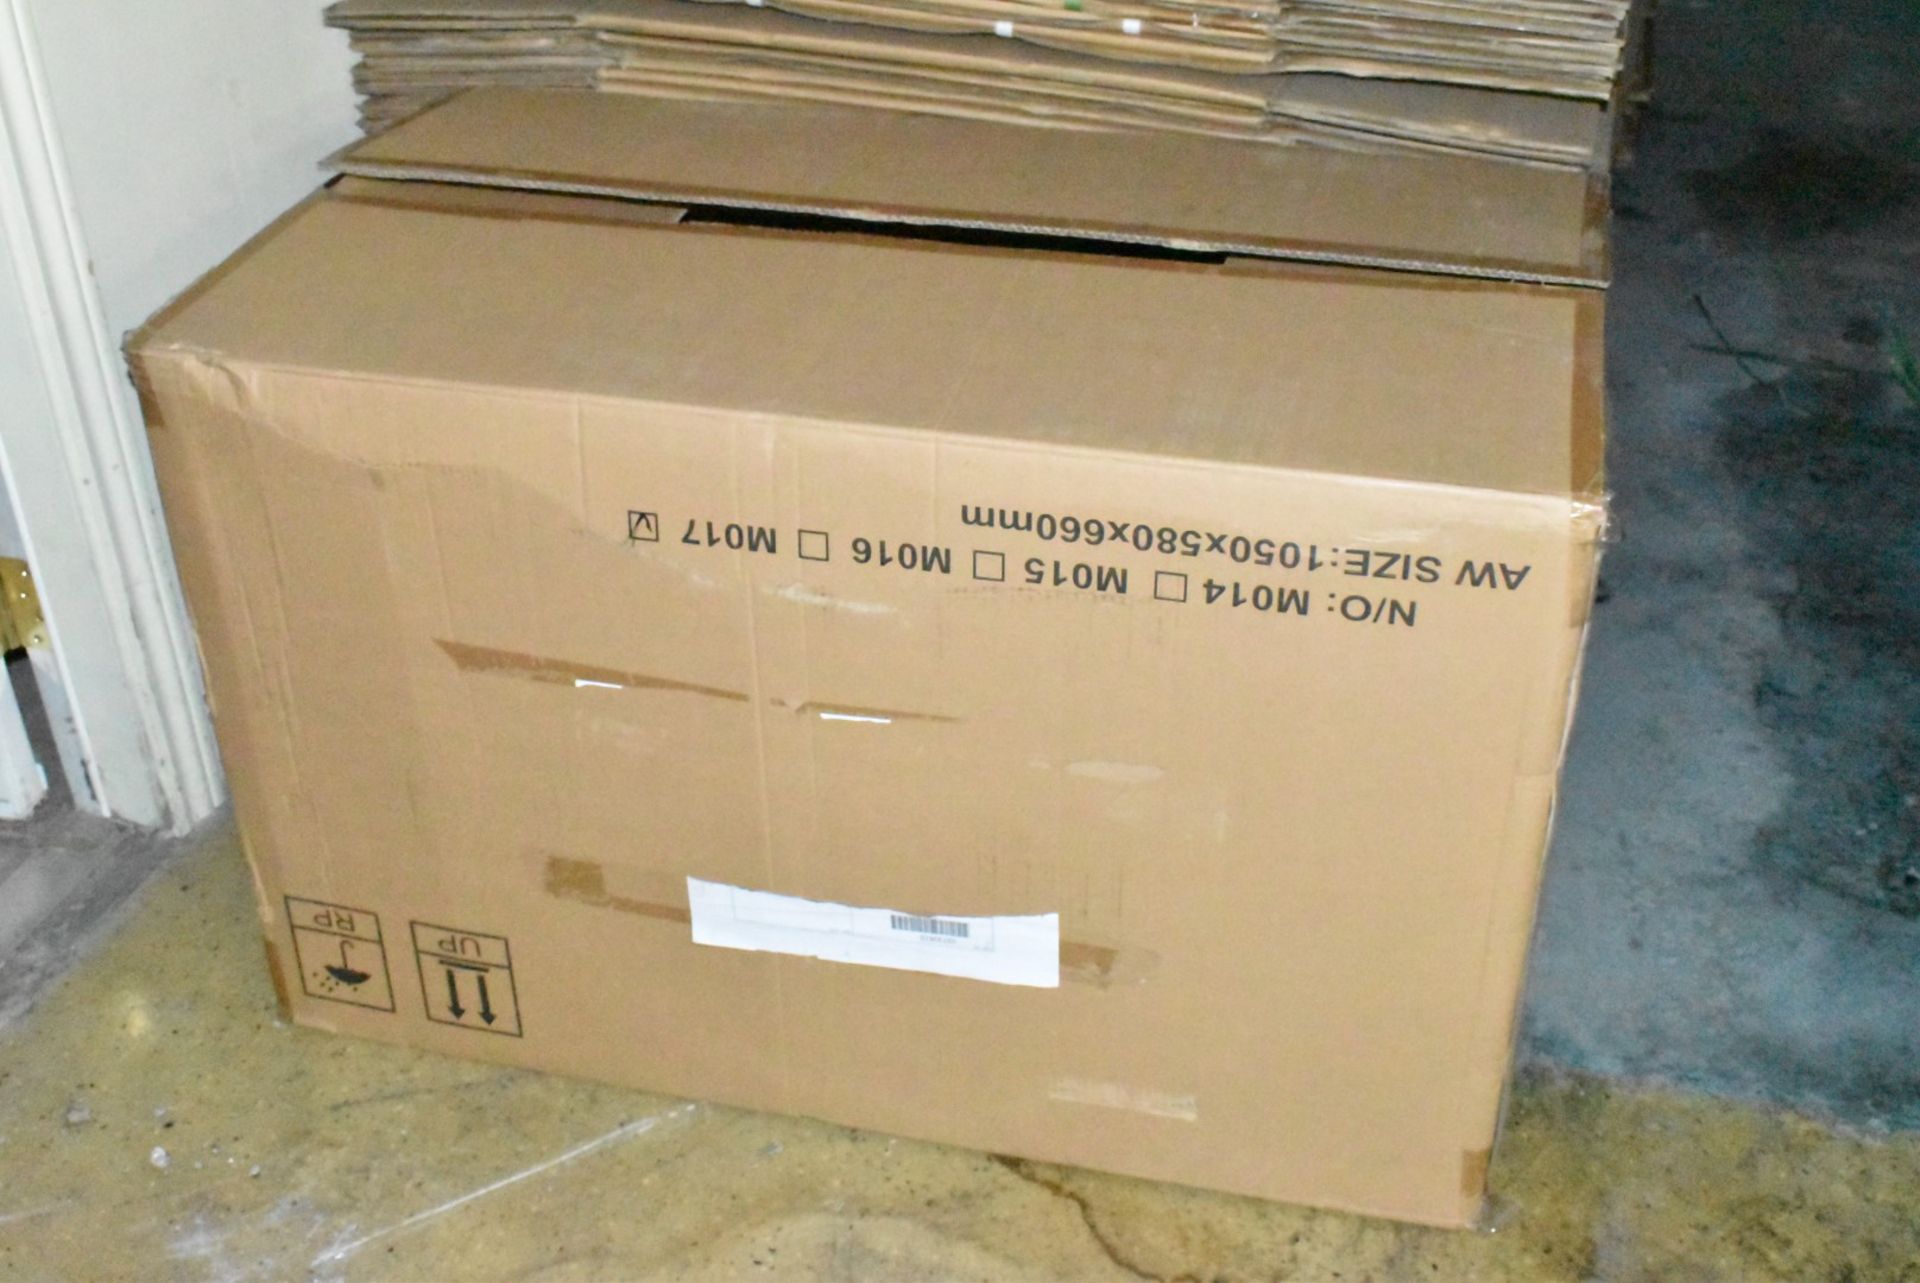 LOT/ SKID OF 41.3"X22.8"X25.9" CARDBOARD BOXES (CI) - Image 2 of 2